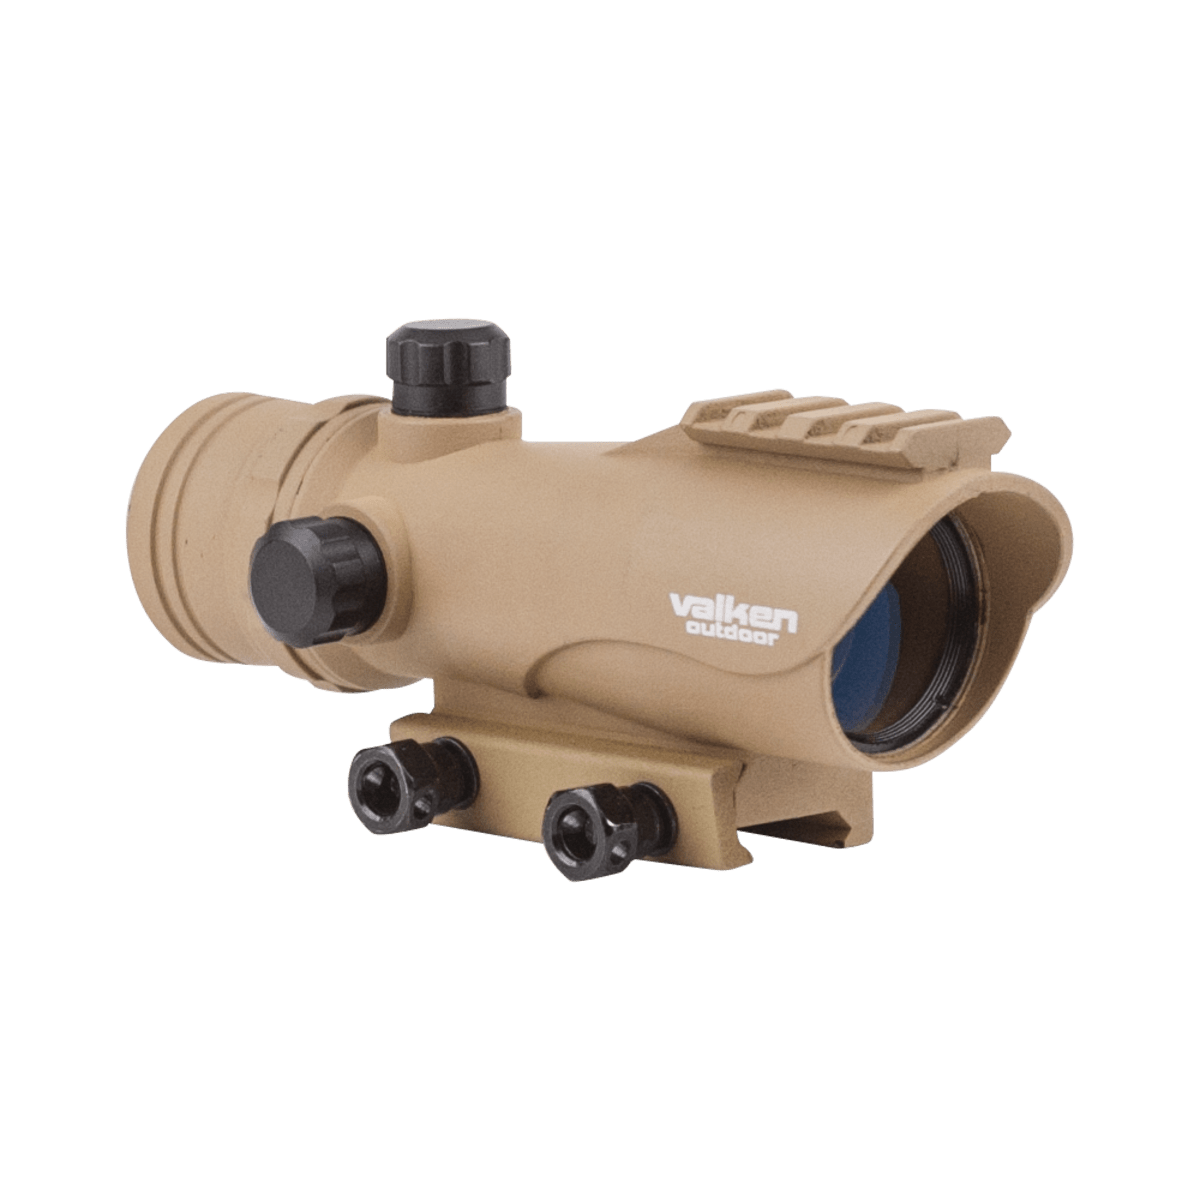 Valken Red Dot Sight RDA30 - Tan - Eminent Paintball And Airsoft